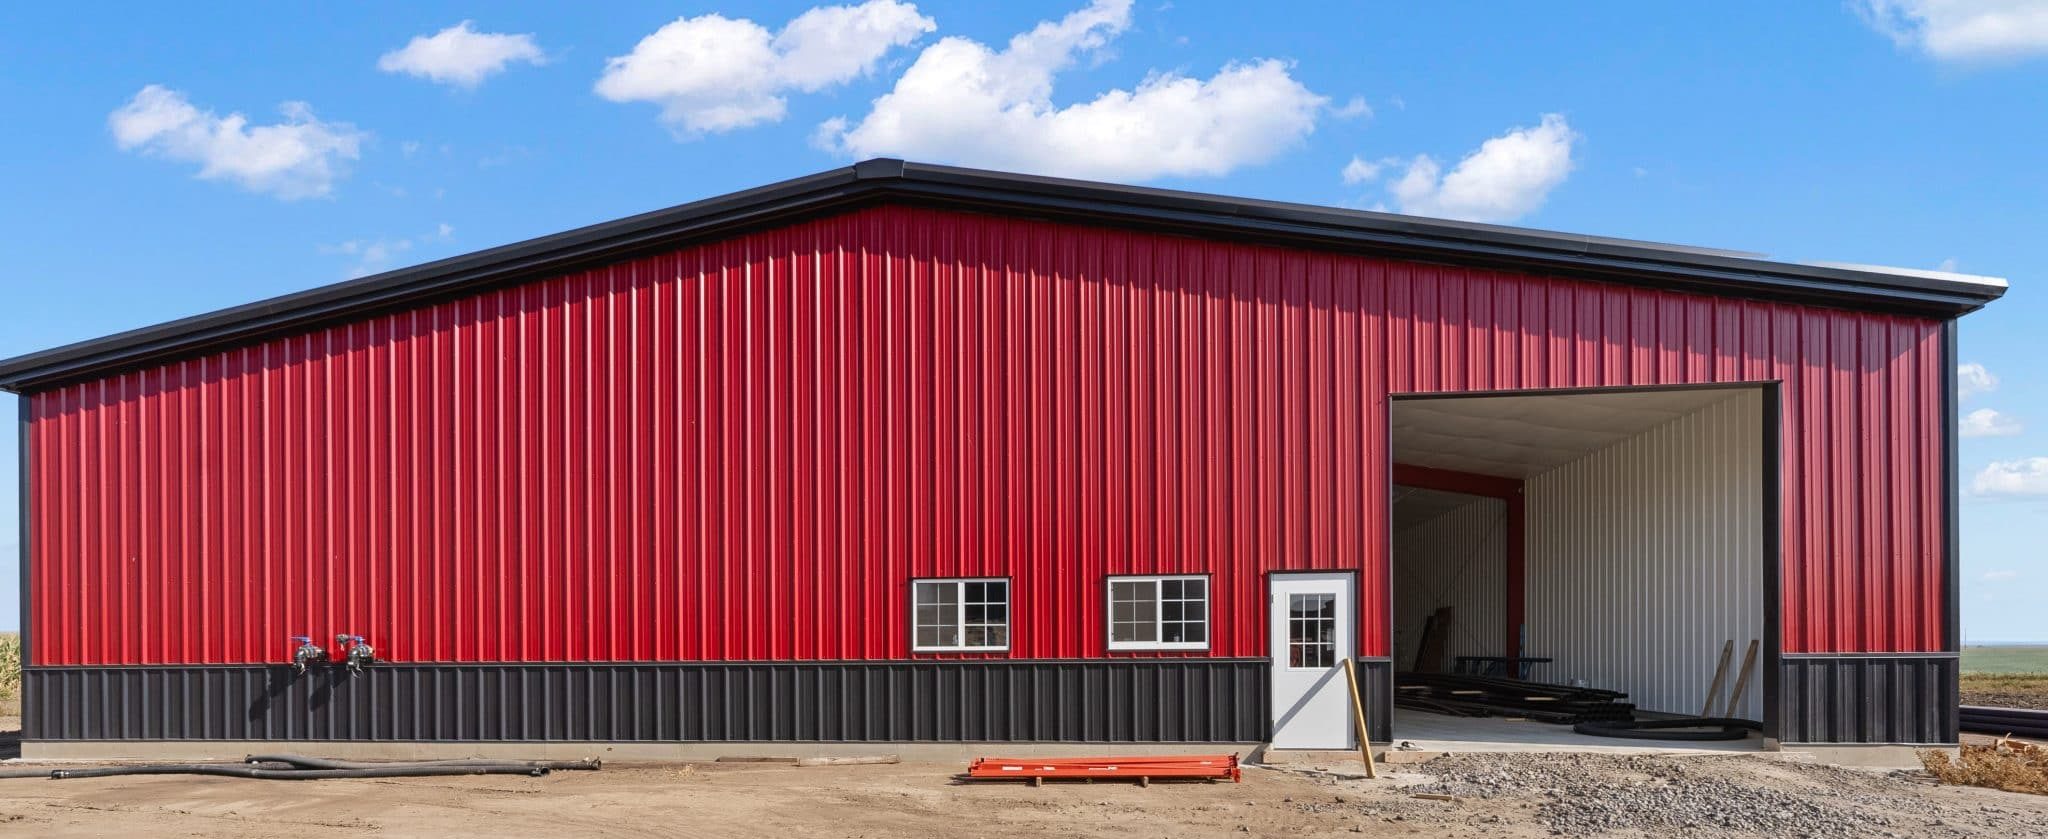 barn with red metal siding and charcoal wainscotting